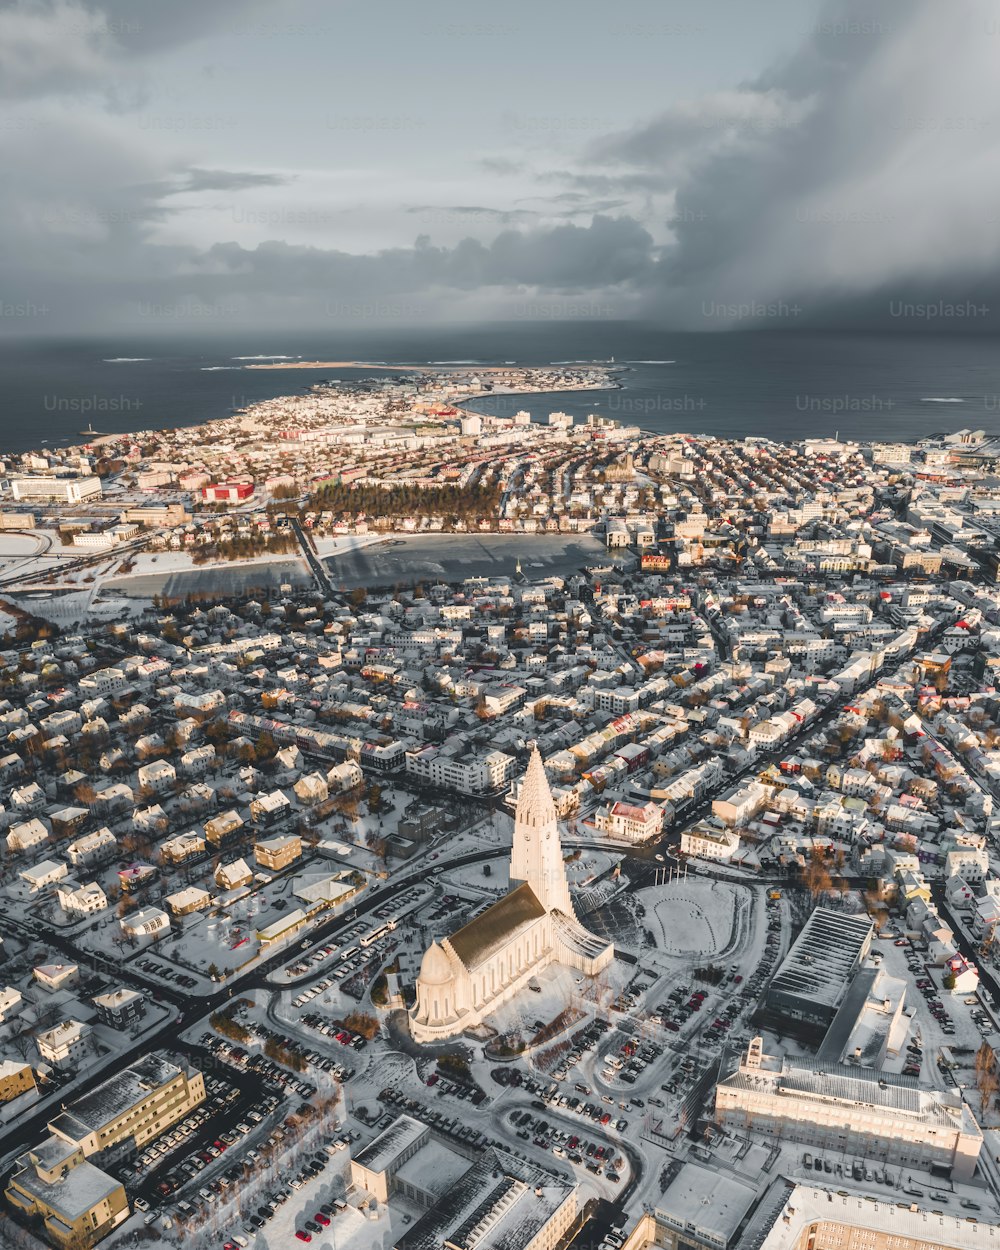 An aerial view of the Reykjavik cityscape in Iceland